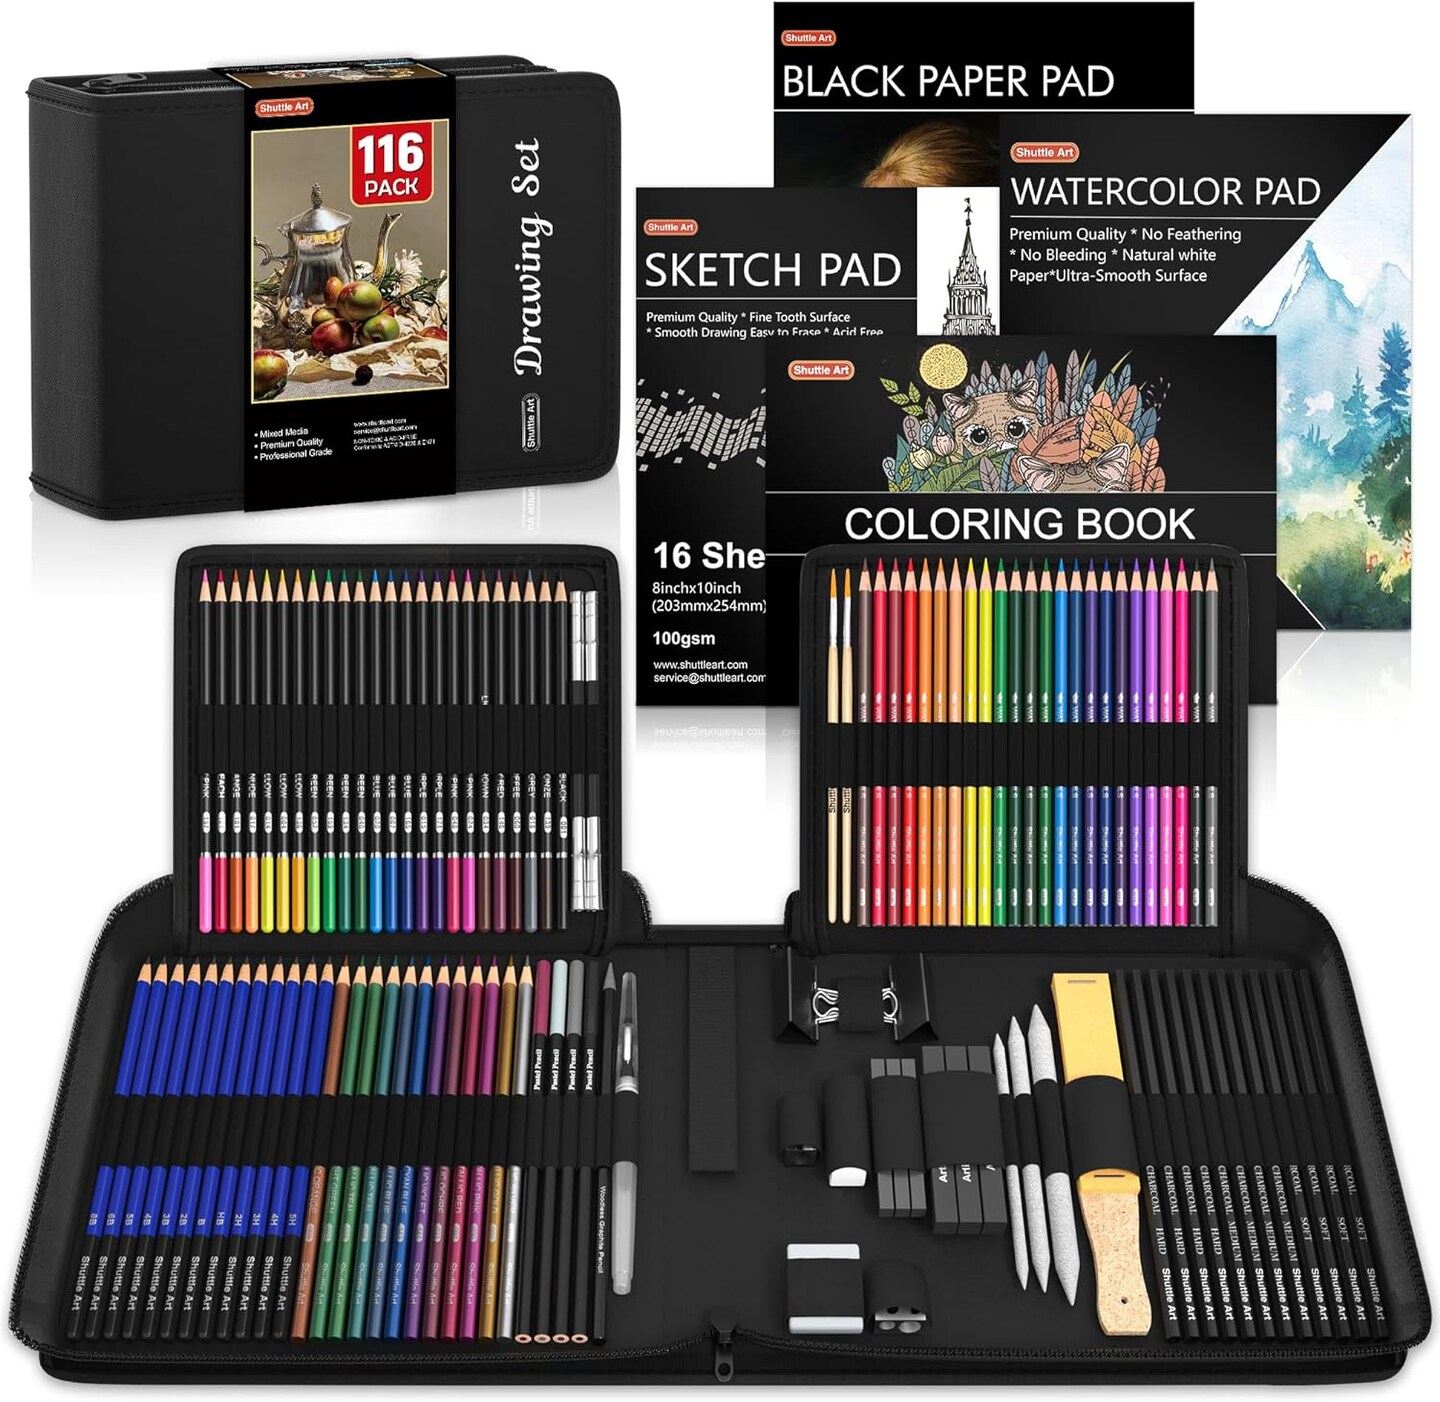 Art 116 PCS Drawing Kit, Complete Drawing Supplies with Sketch Pencils, Colored Pencils, Graphite, Charcoal Sticks, Professional Drawing Tools, and Paper Pads for Artists, Beginners, and Children